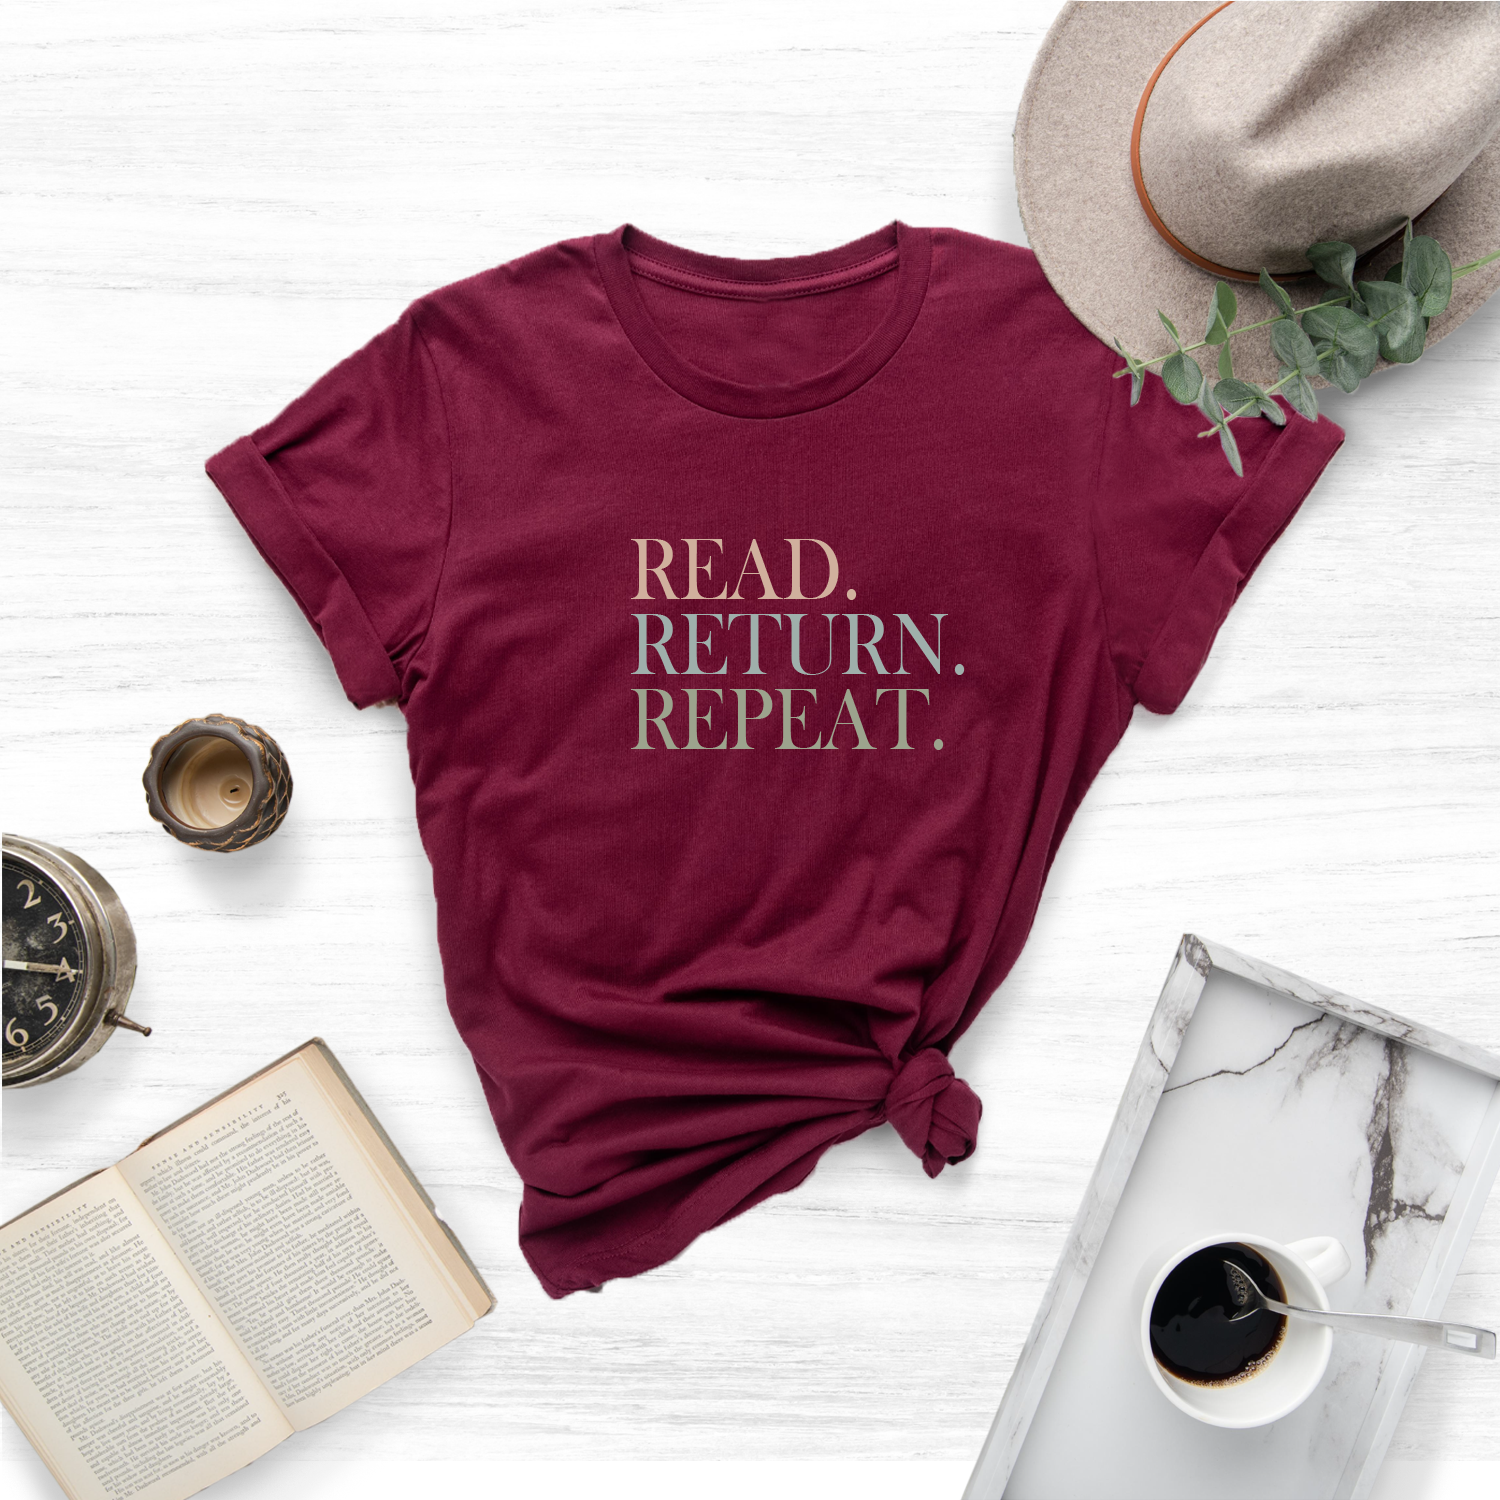    Unleash Your Inner Bookworm with the Stylish and Literary "Reading Shirt, Library Shirt"